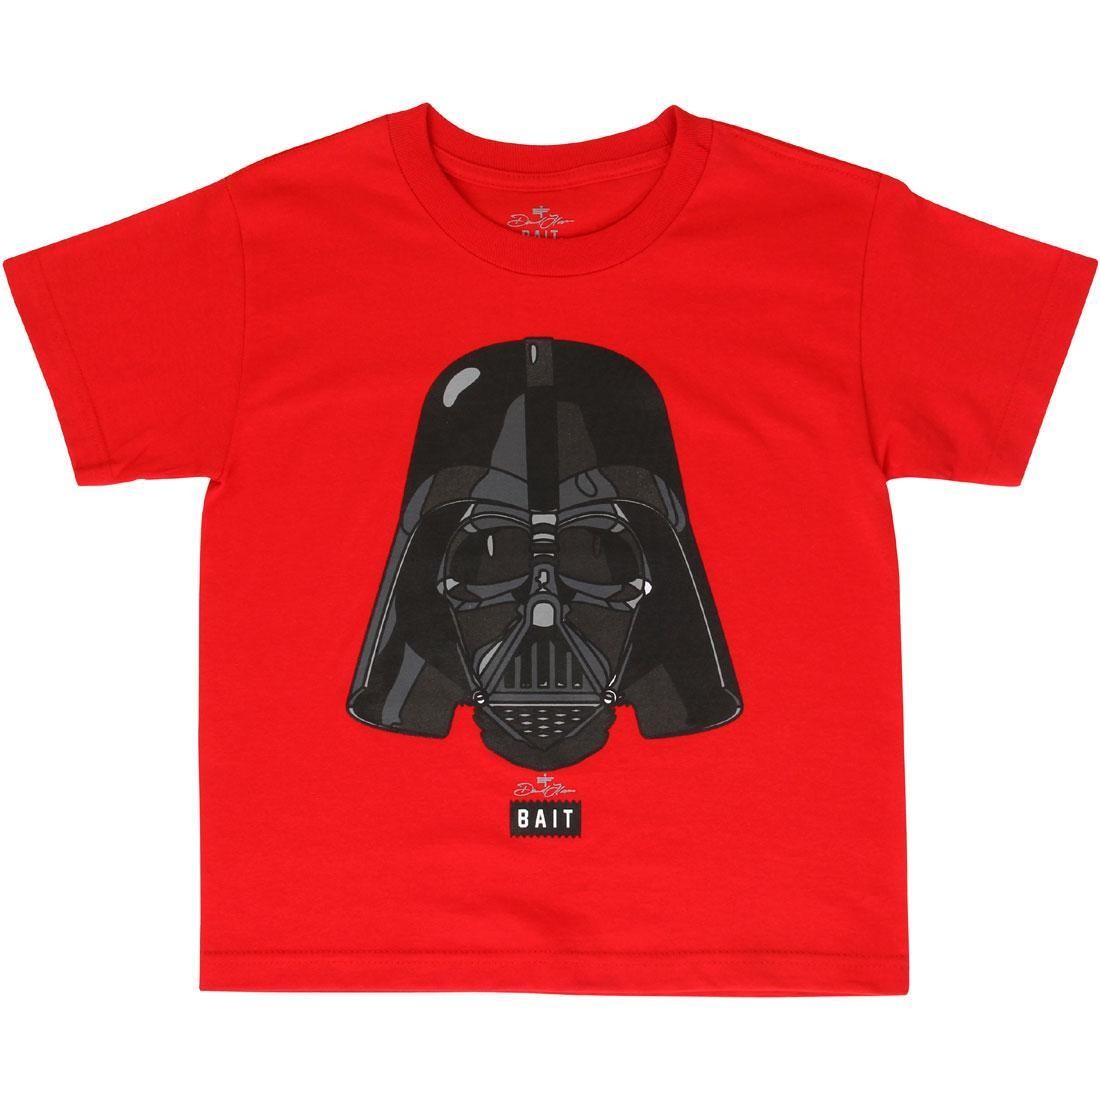 BAIT x David Flores Vader Youth Tee (red)